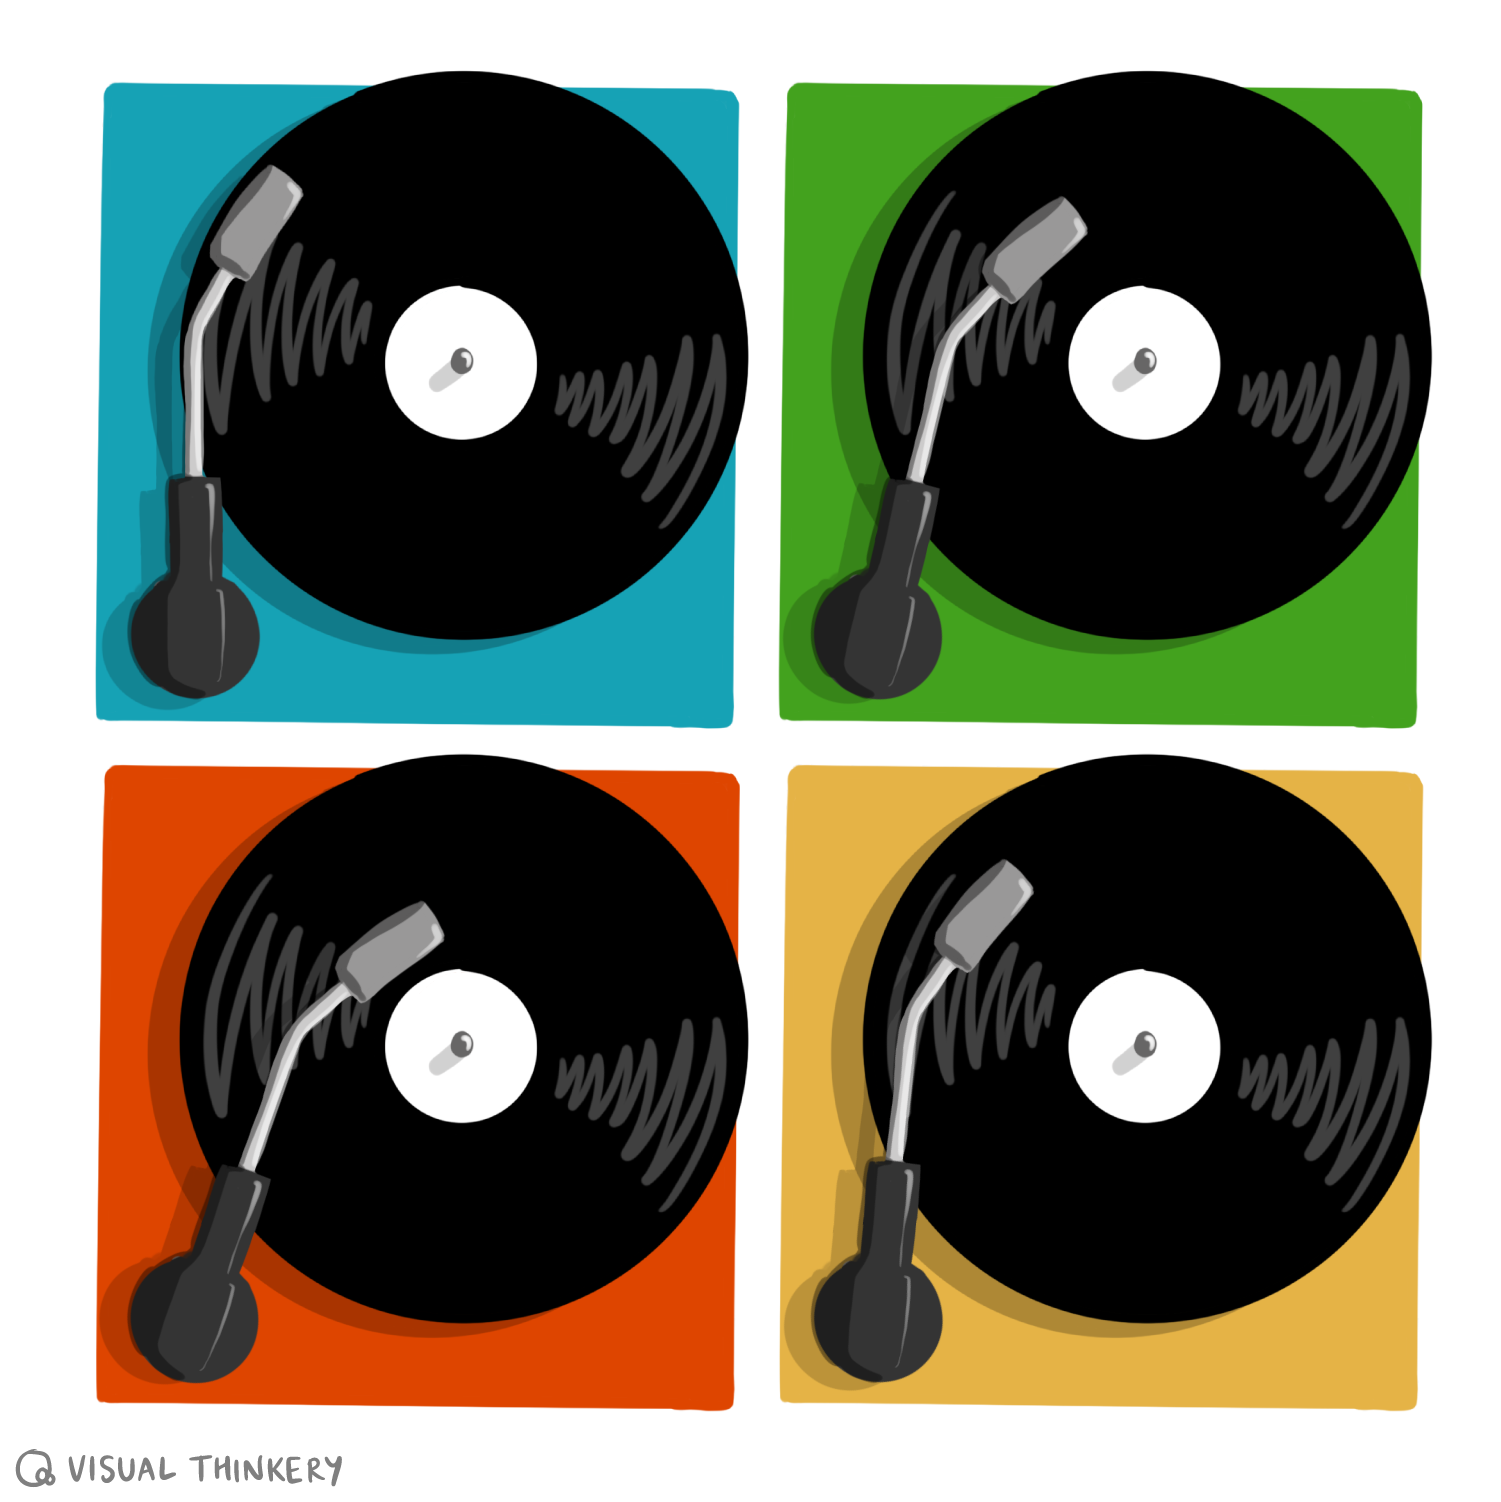 Drawing of different coloured record players with vinyl records